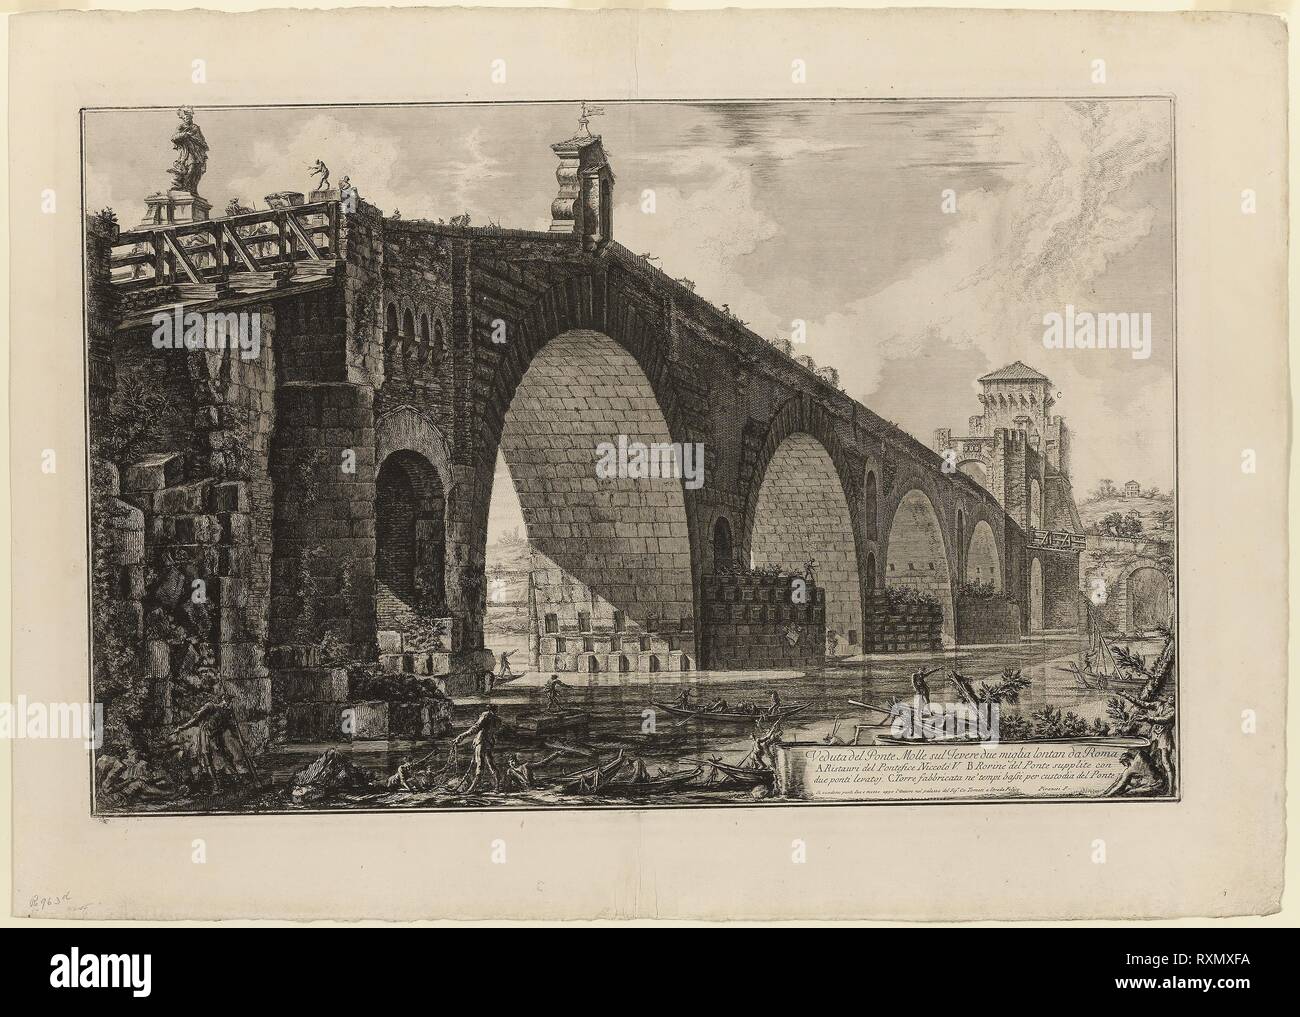 View of the Ponte Molle [or Milvian Bridge] over the Tiber two miles outside Rome, from Views of Rome. Giovanni Battista Piranesi; Italian, 1720-1778. Date: 1762. Dimensions: 437 x 675 mm (image); 440 x 677 mm (plate); 562 x 788 mm (sheet). Etching on heavy ivory laid paper. Origin: Italy. Museum: The Chicago Art Institute. Stock Photo